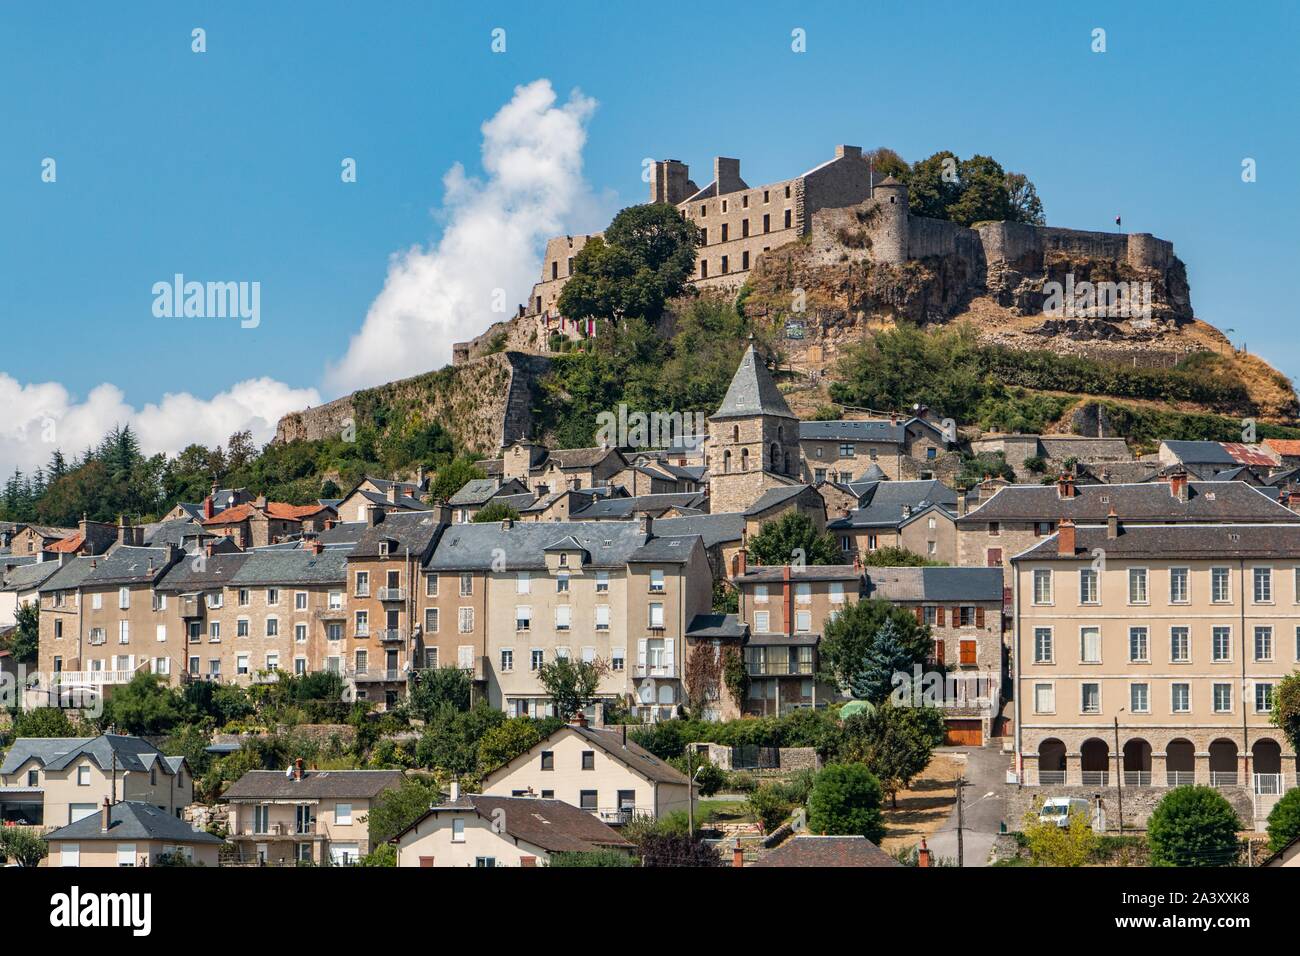 GENERAL VIEW OF THE TOWN OF SEVERAC WITH THE CHATEAU DE SEVERAC-LE ...